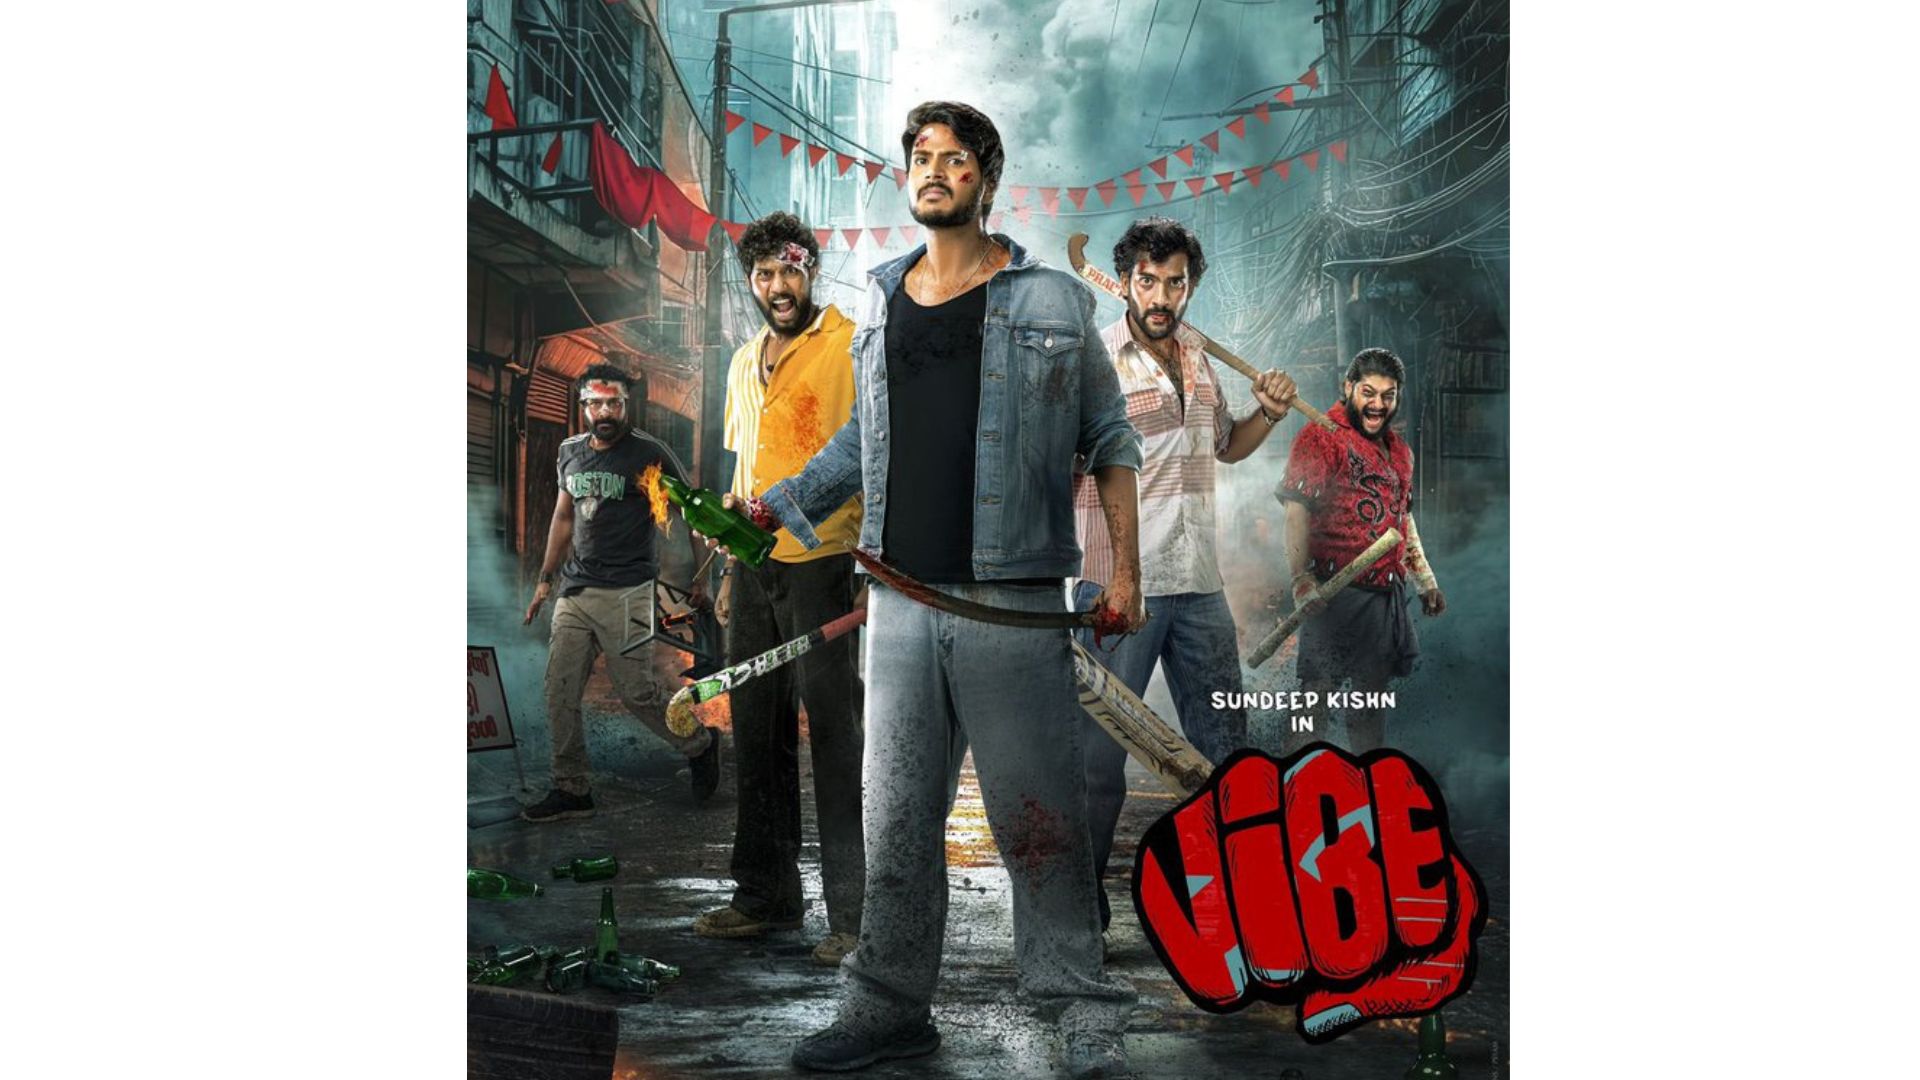 VIBE update: The initial glimpse of the movie 'Vibe', starring Sudeep Kishan, has been unveiled